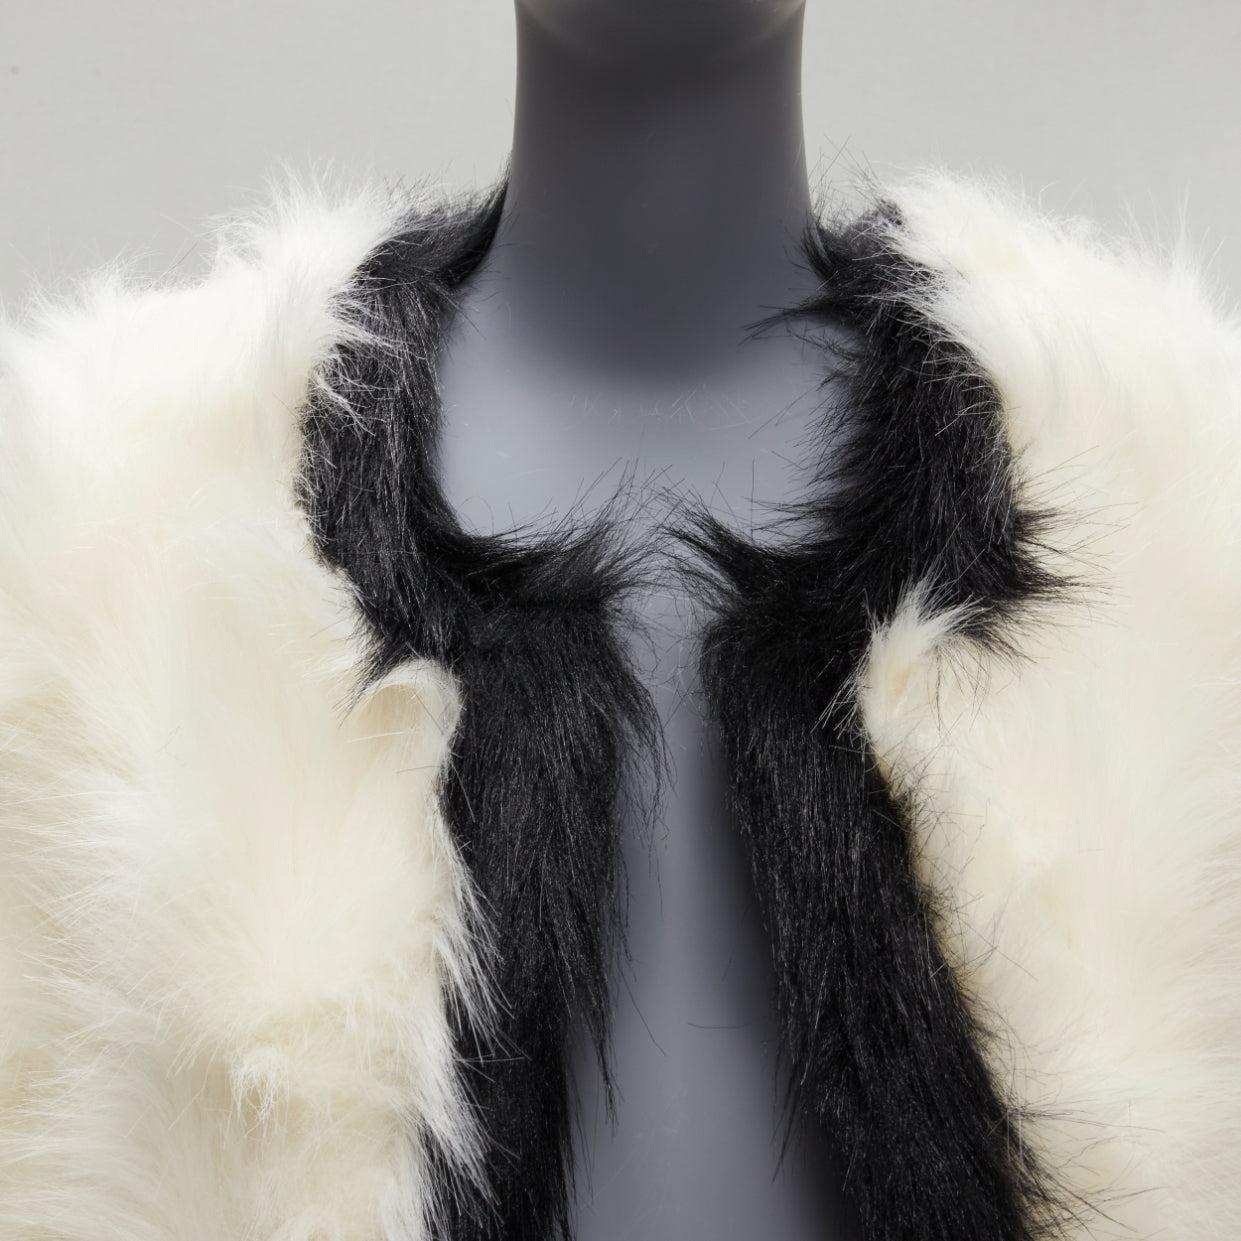 new SAINT LAURENT 2021 Runway cream black faux fur cropped jacket FR34 XS
Reference: TGAS/D00744
Brand: Saint Laurent
Designer: Anthony Vaccarello
Collection: 2021 - Runway
Material: Faux Fur
Color: White, Black
Pattern: Solid
Lining: Black